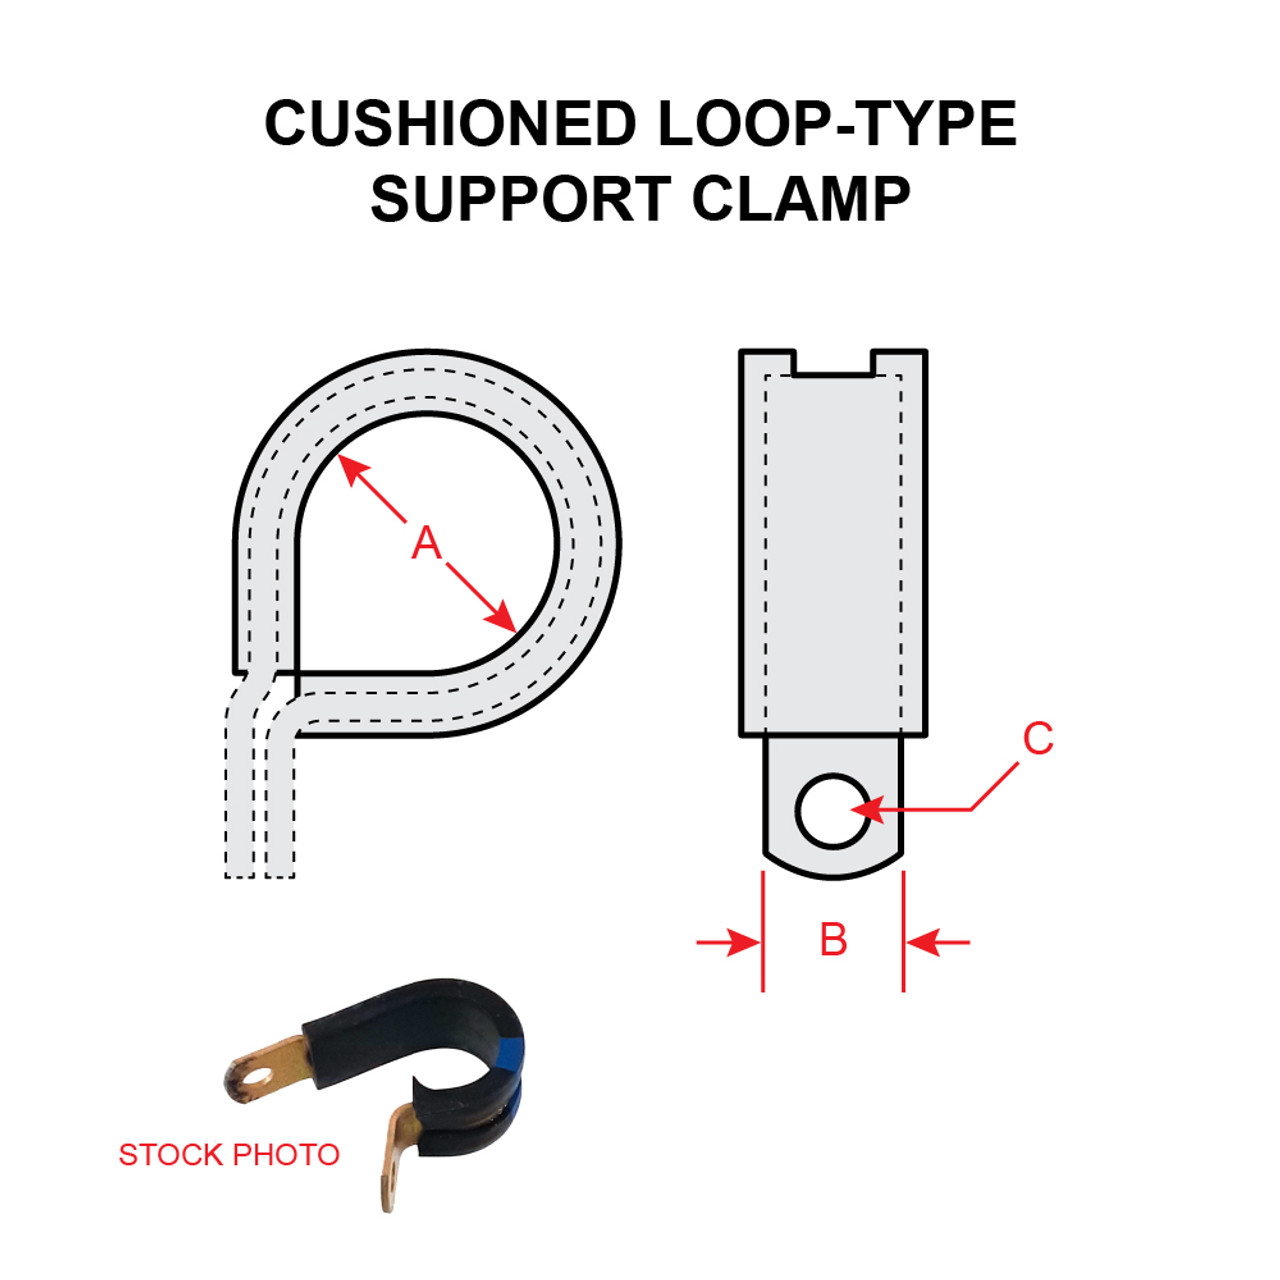 MS21919WDG20   LOOP-TYPE SUPPORT CLAMP - CUSHIONED